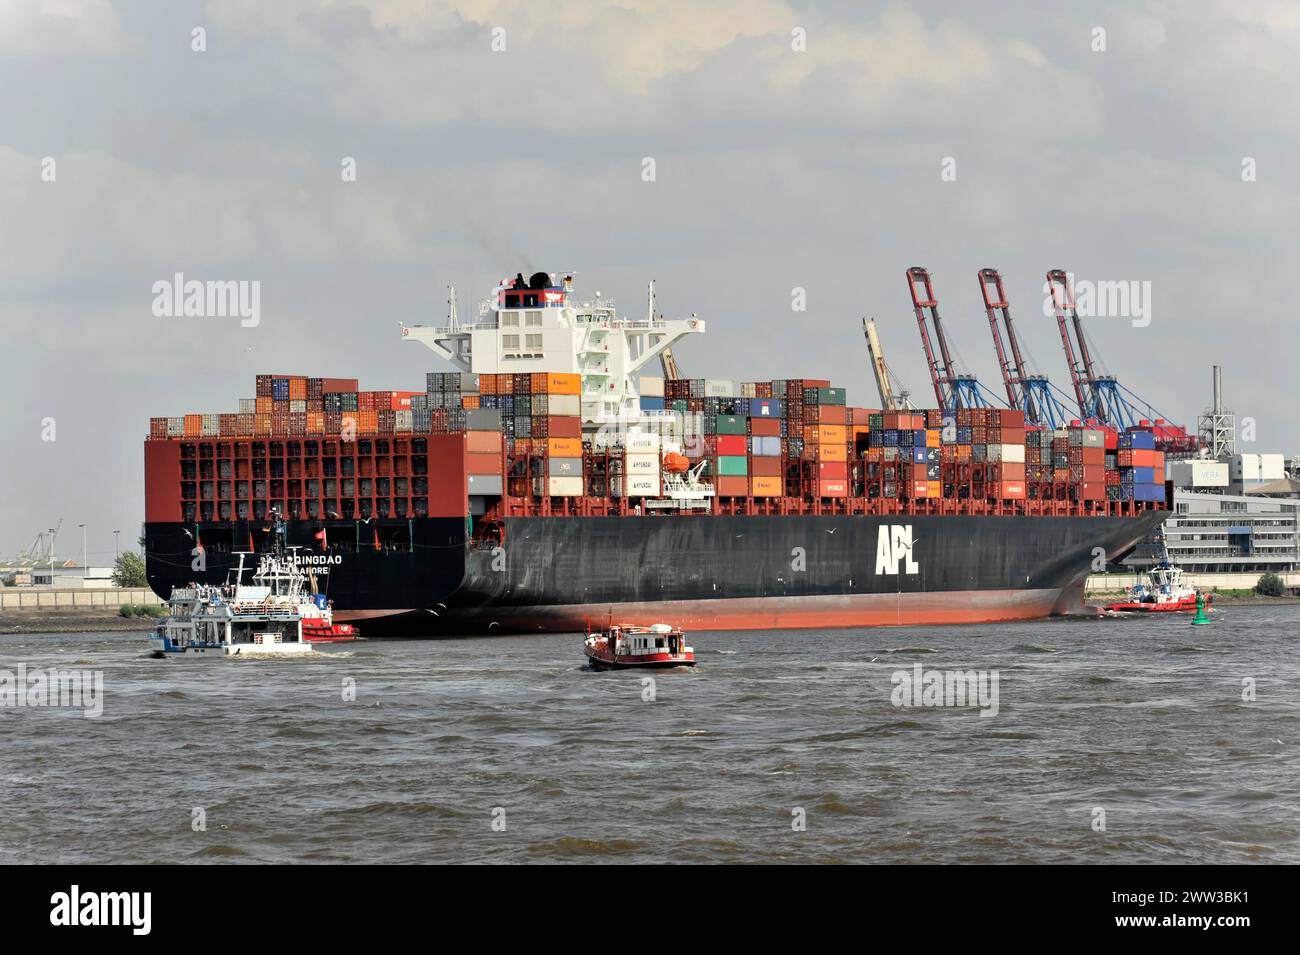 Container ship is docked in the harbour, surrounded by tugboats and cranes, Hamburg, Hanseatic city, Germany Stock Photo